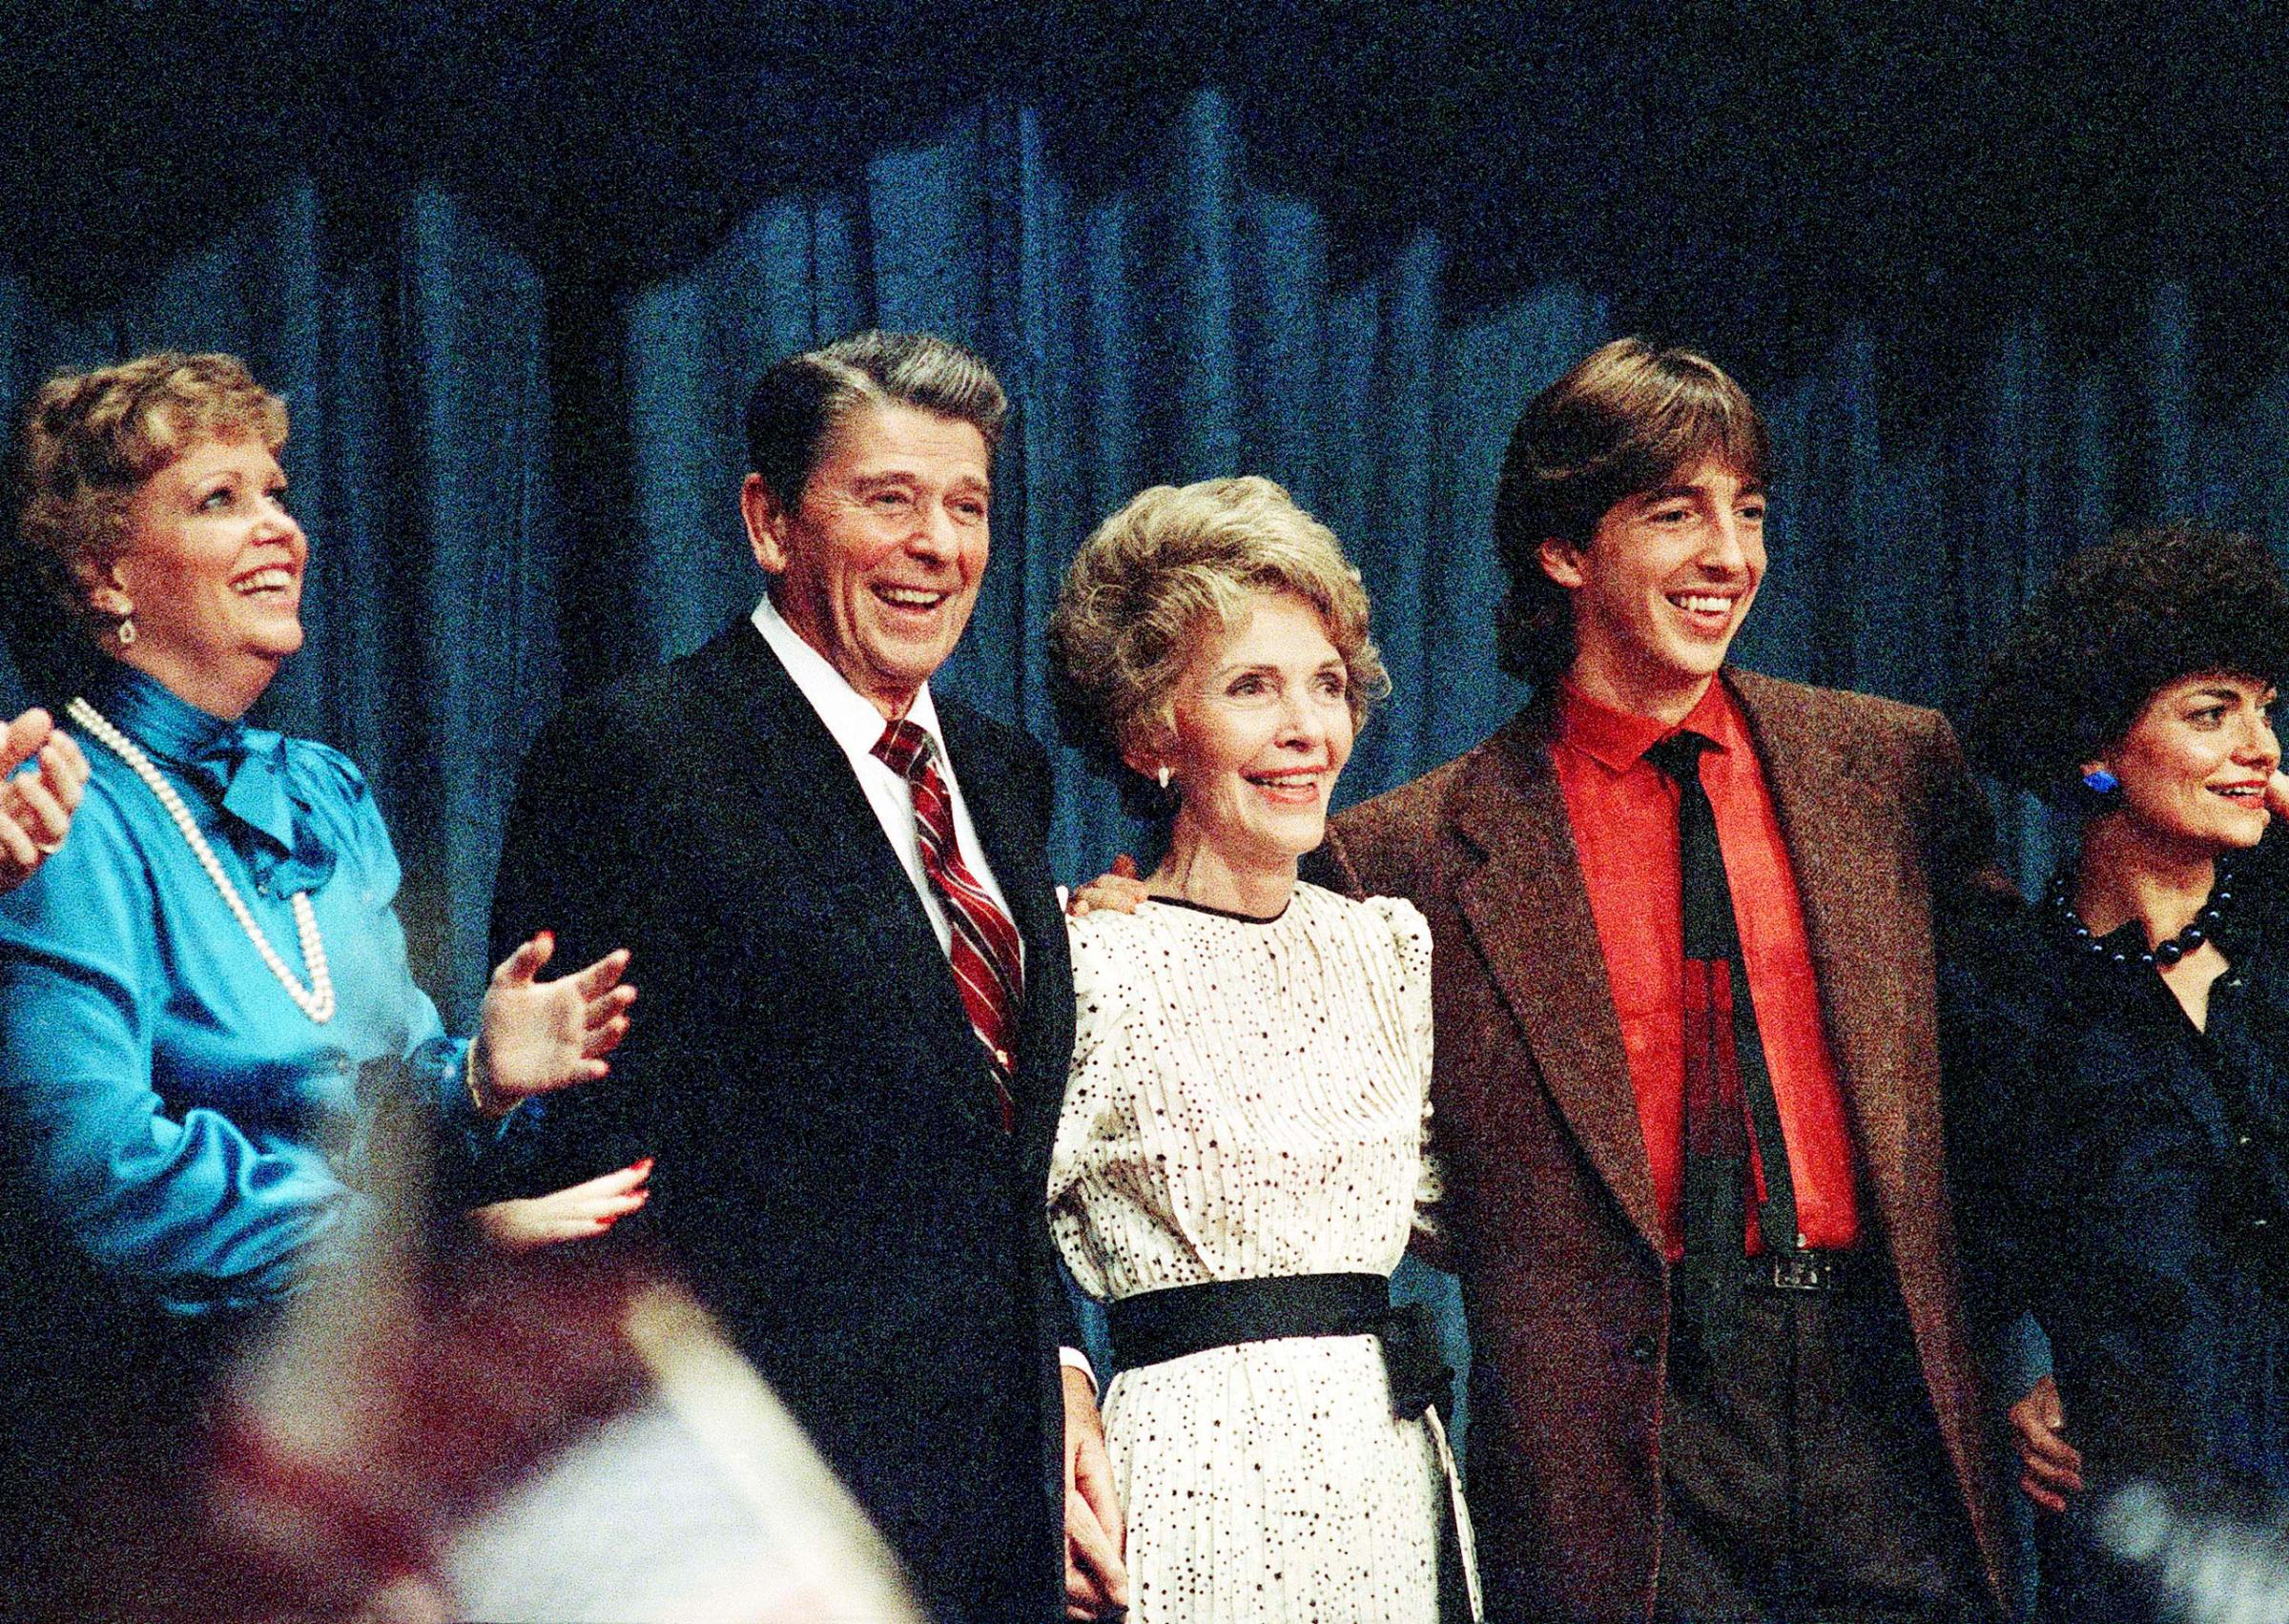 The Reagan's smile and gather together during Ronald Reagan's Victory, on Nov. 6, 1984.